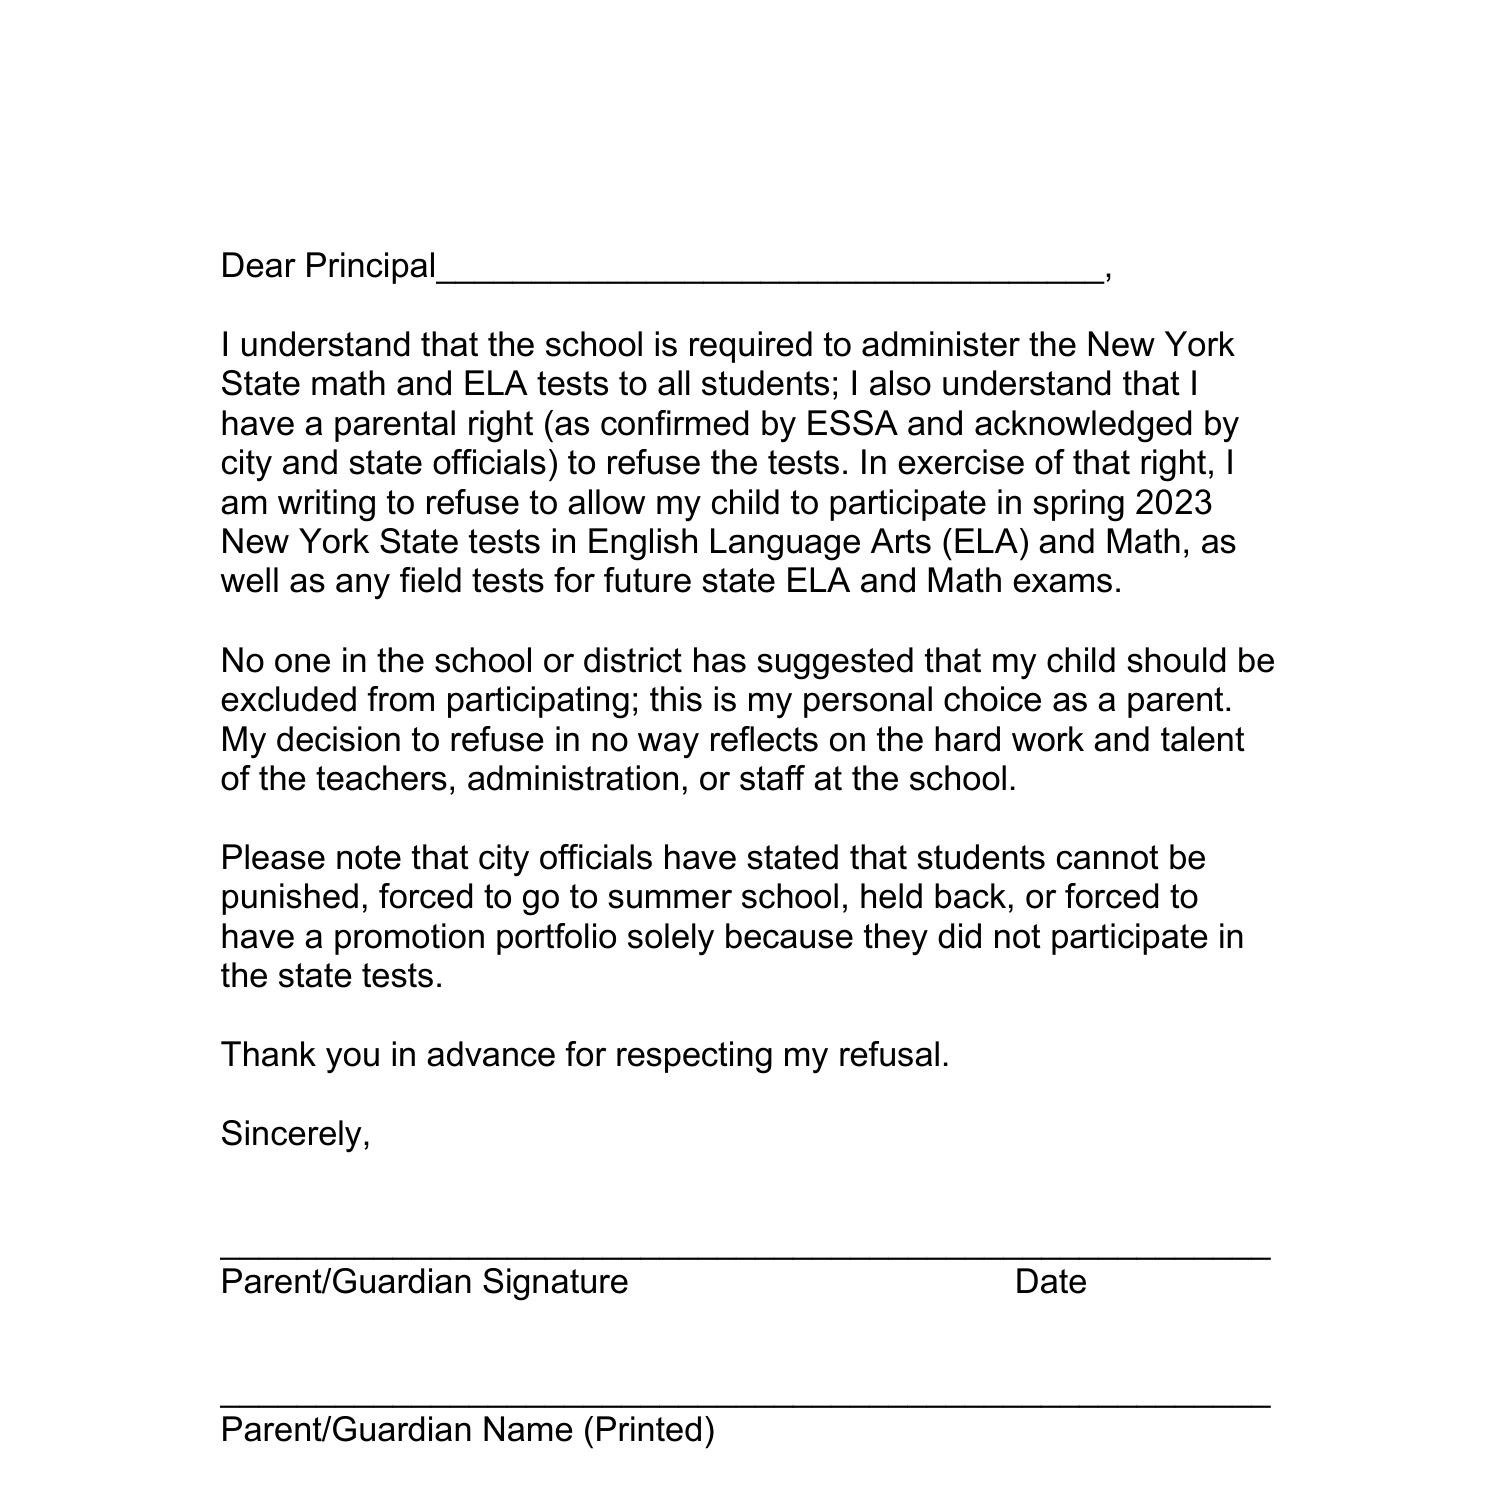 2023 Opt Out Letter.pdf DocDroid